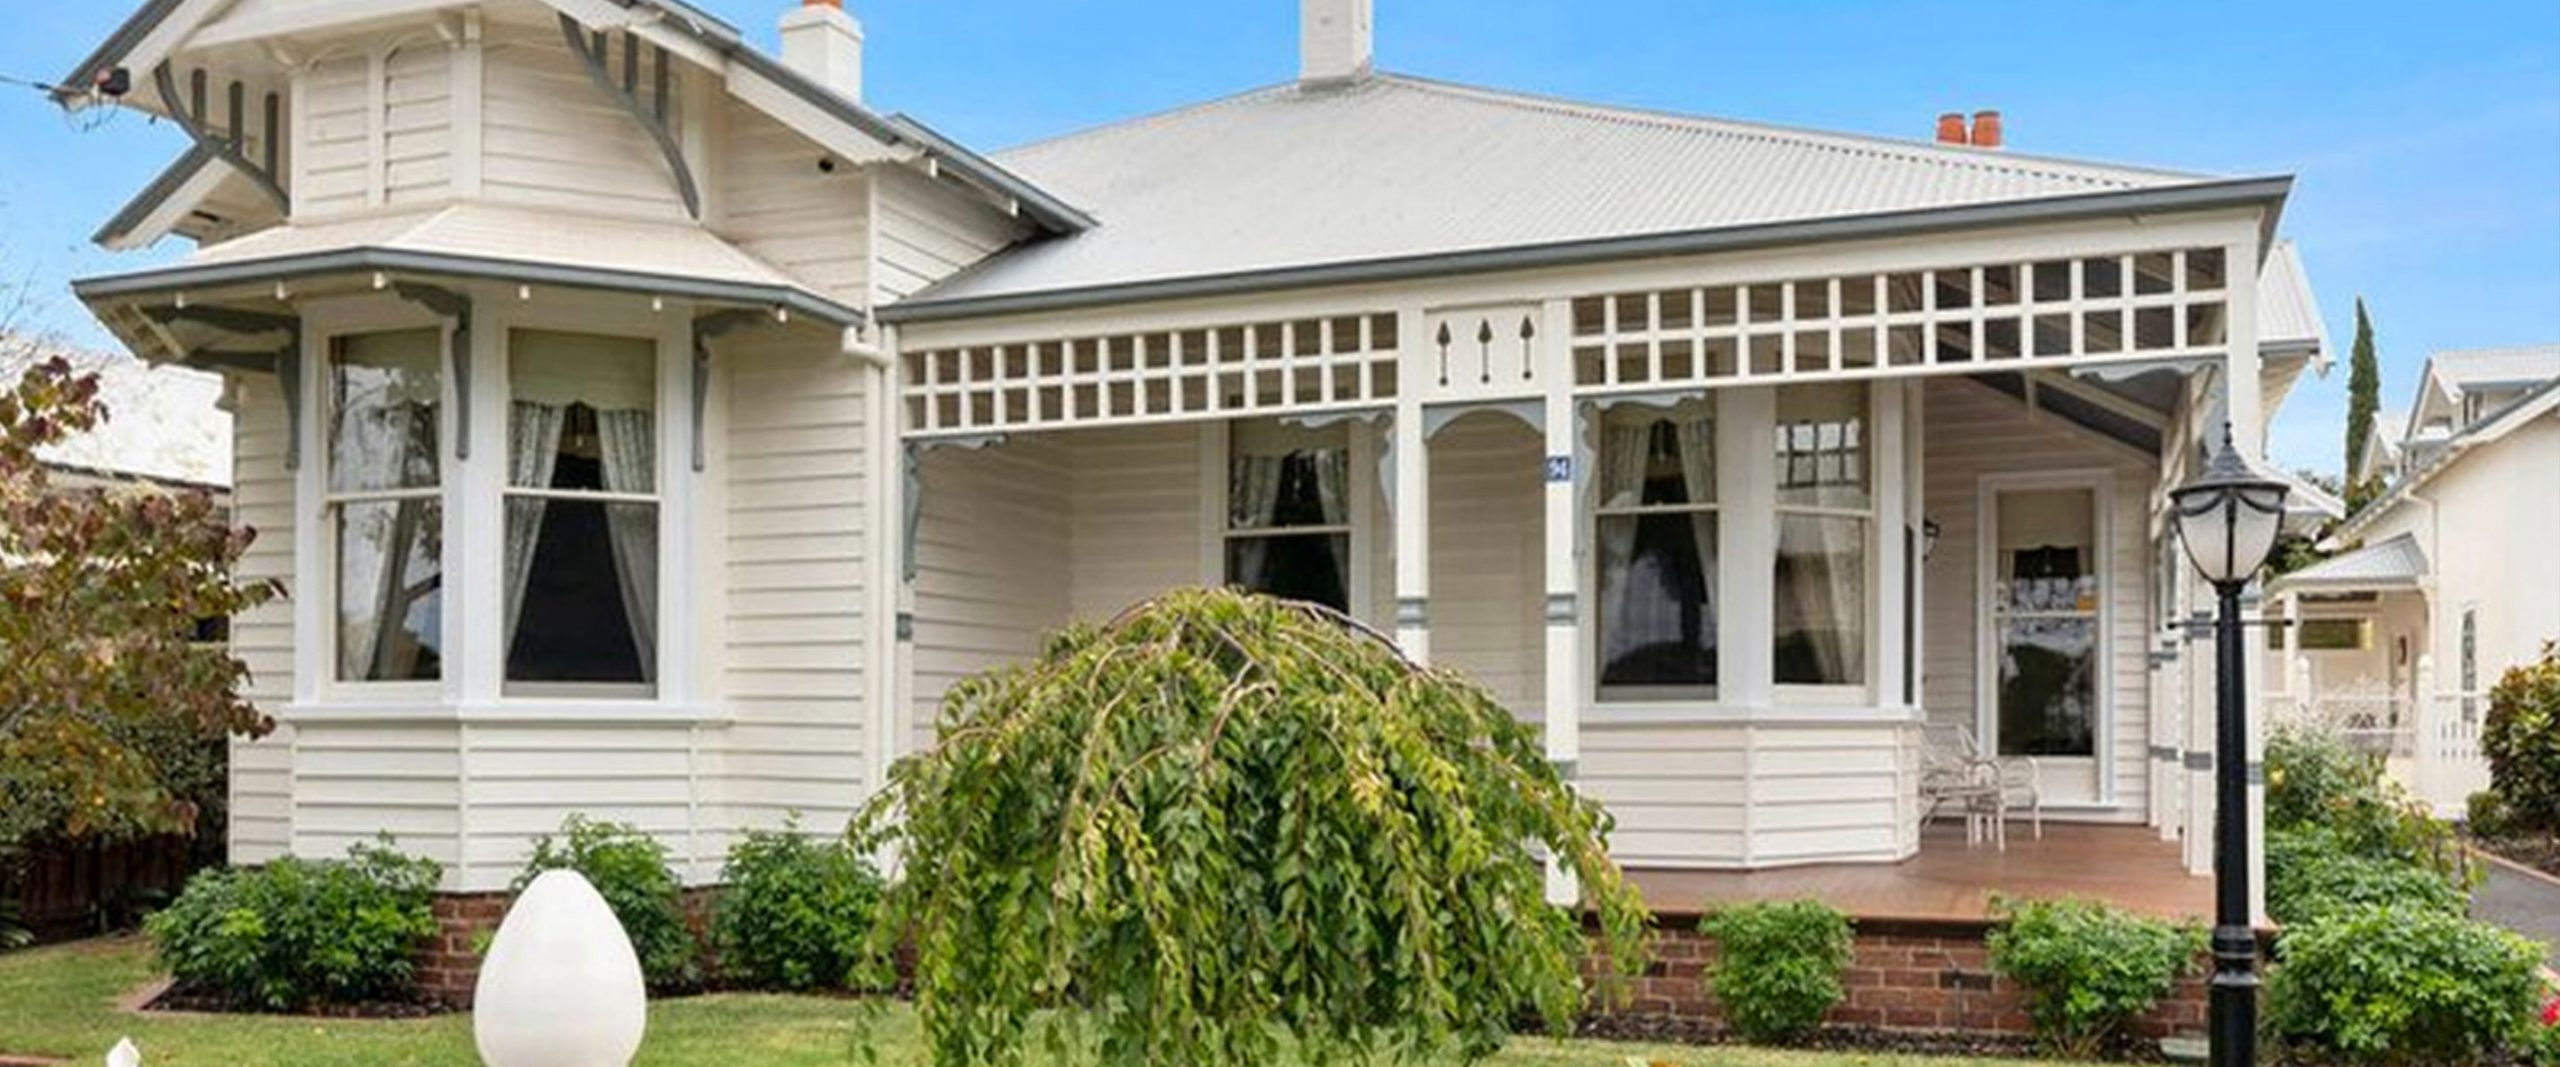 How to add value to your home with street appeal